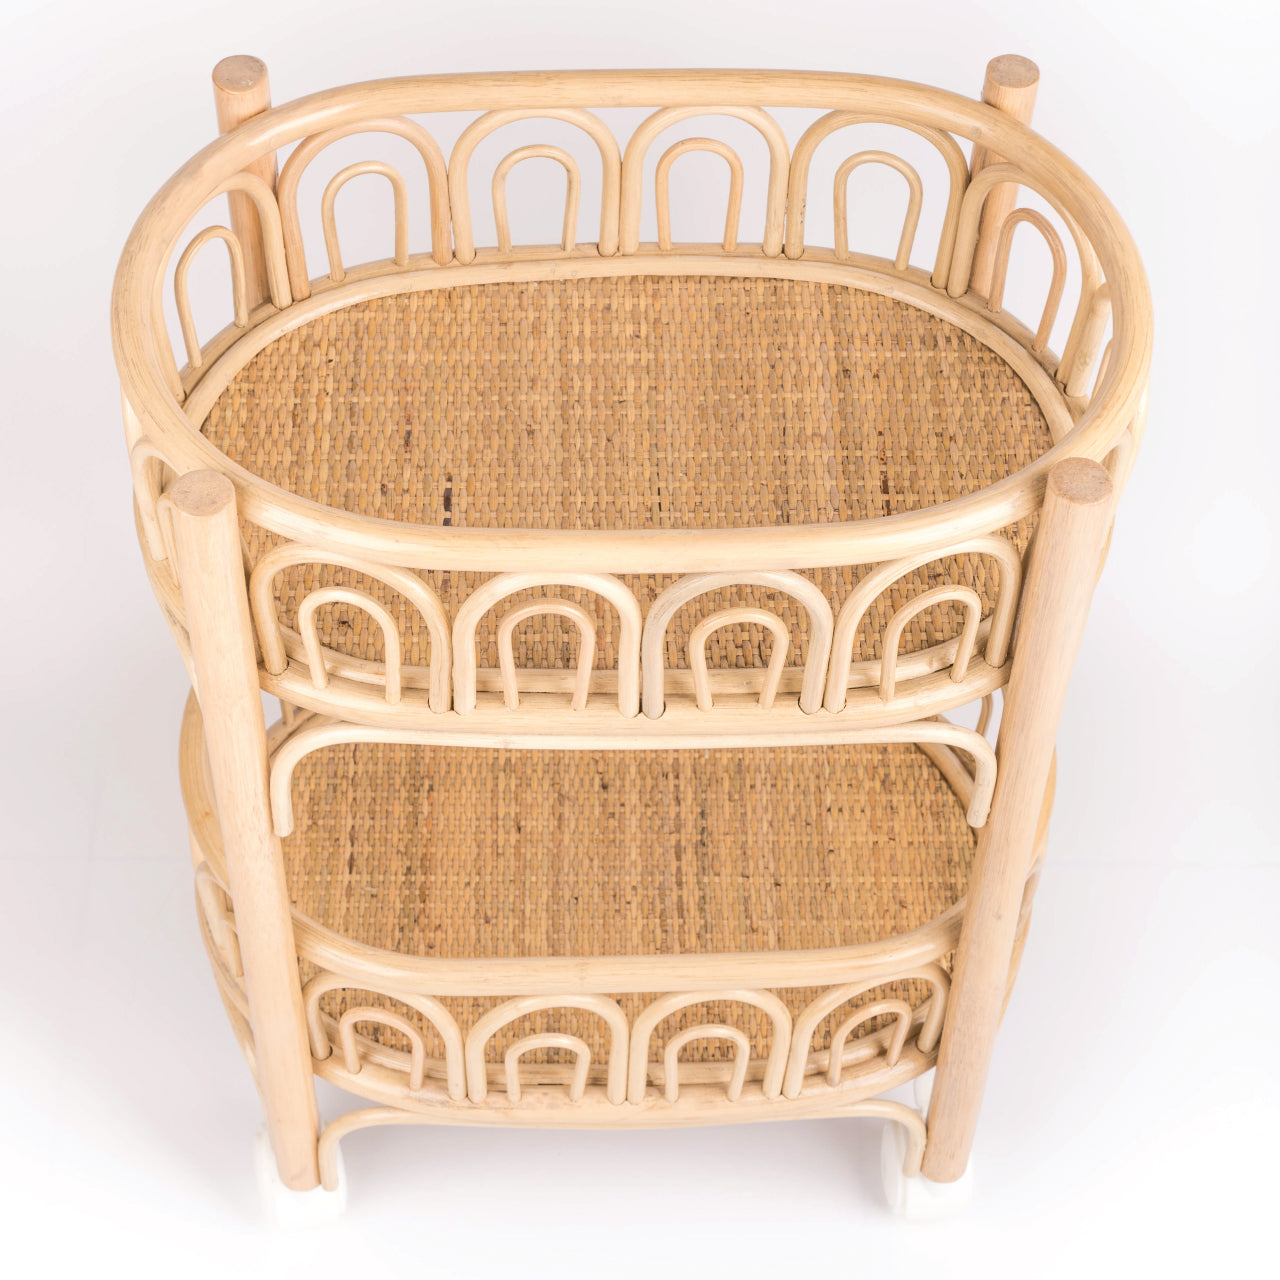 Ellie's Organising and Crafts Cart | Shop Rattan Toys & Furniture Online | Kathy's Cove